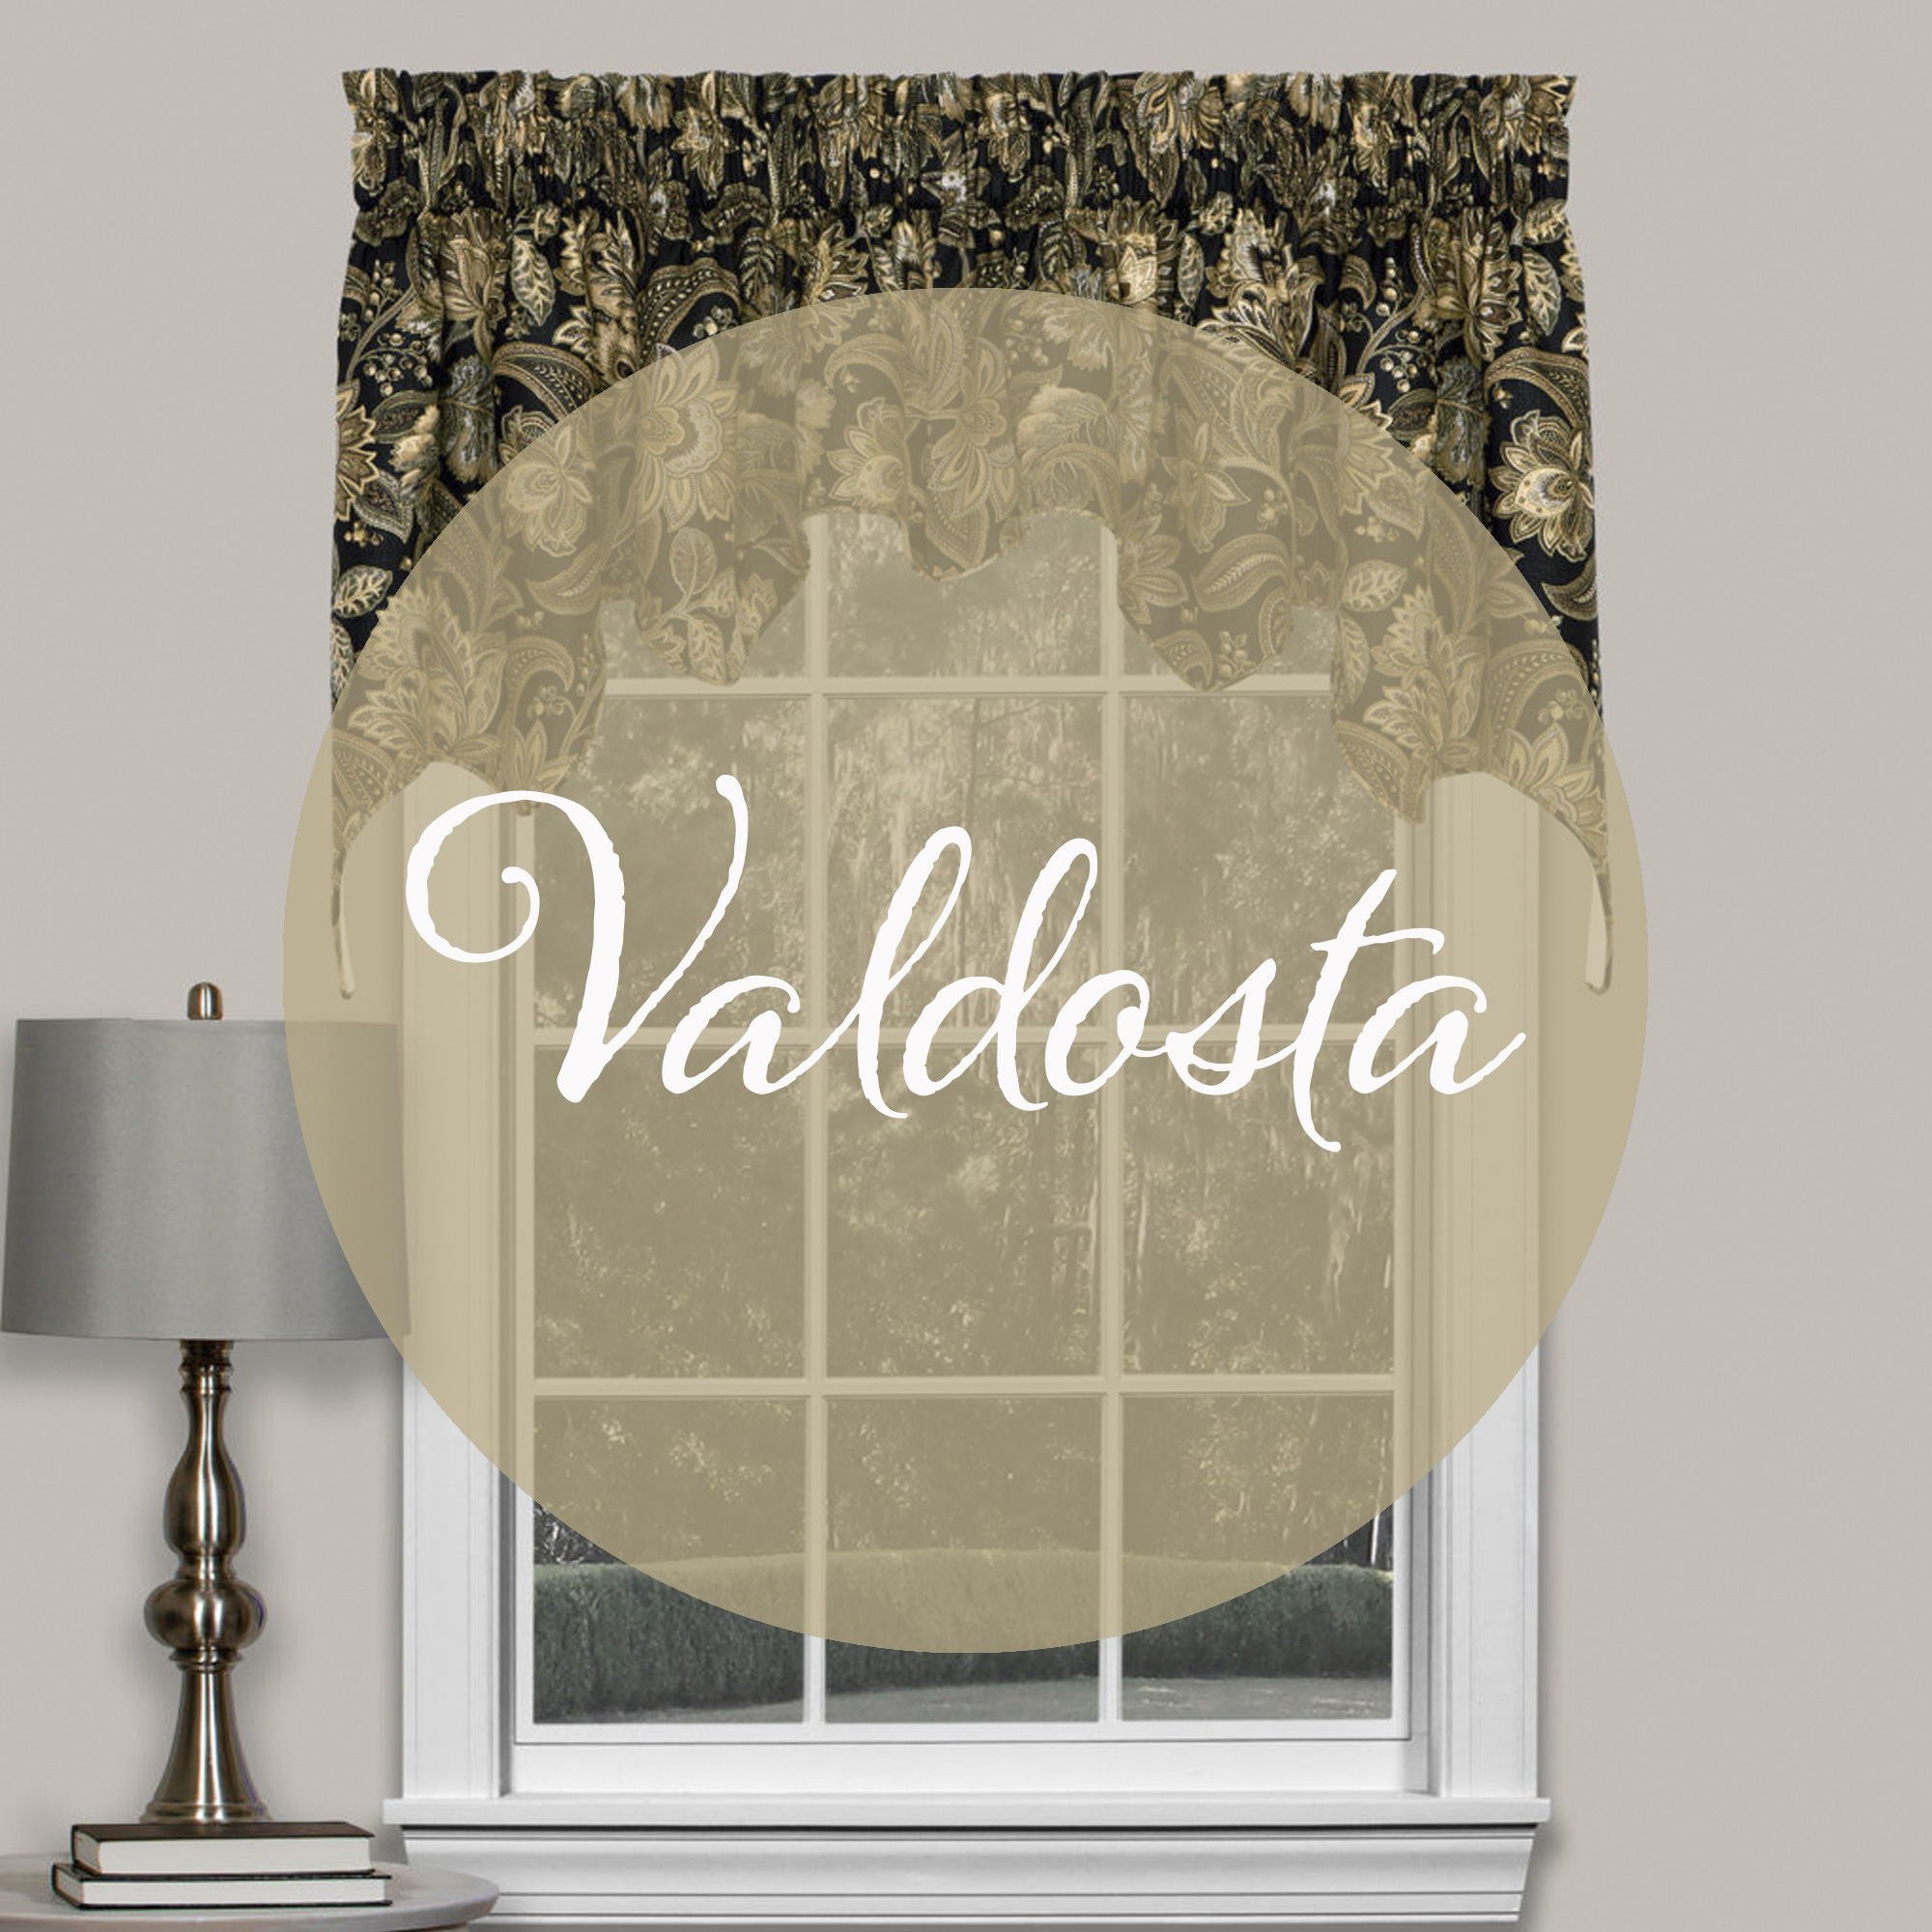 Link to Complete Valdosta Collection from Home Page